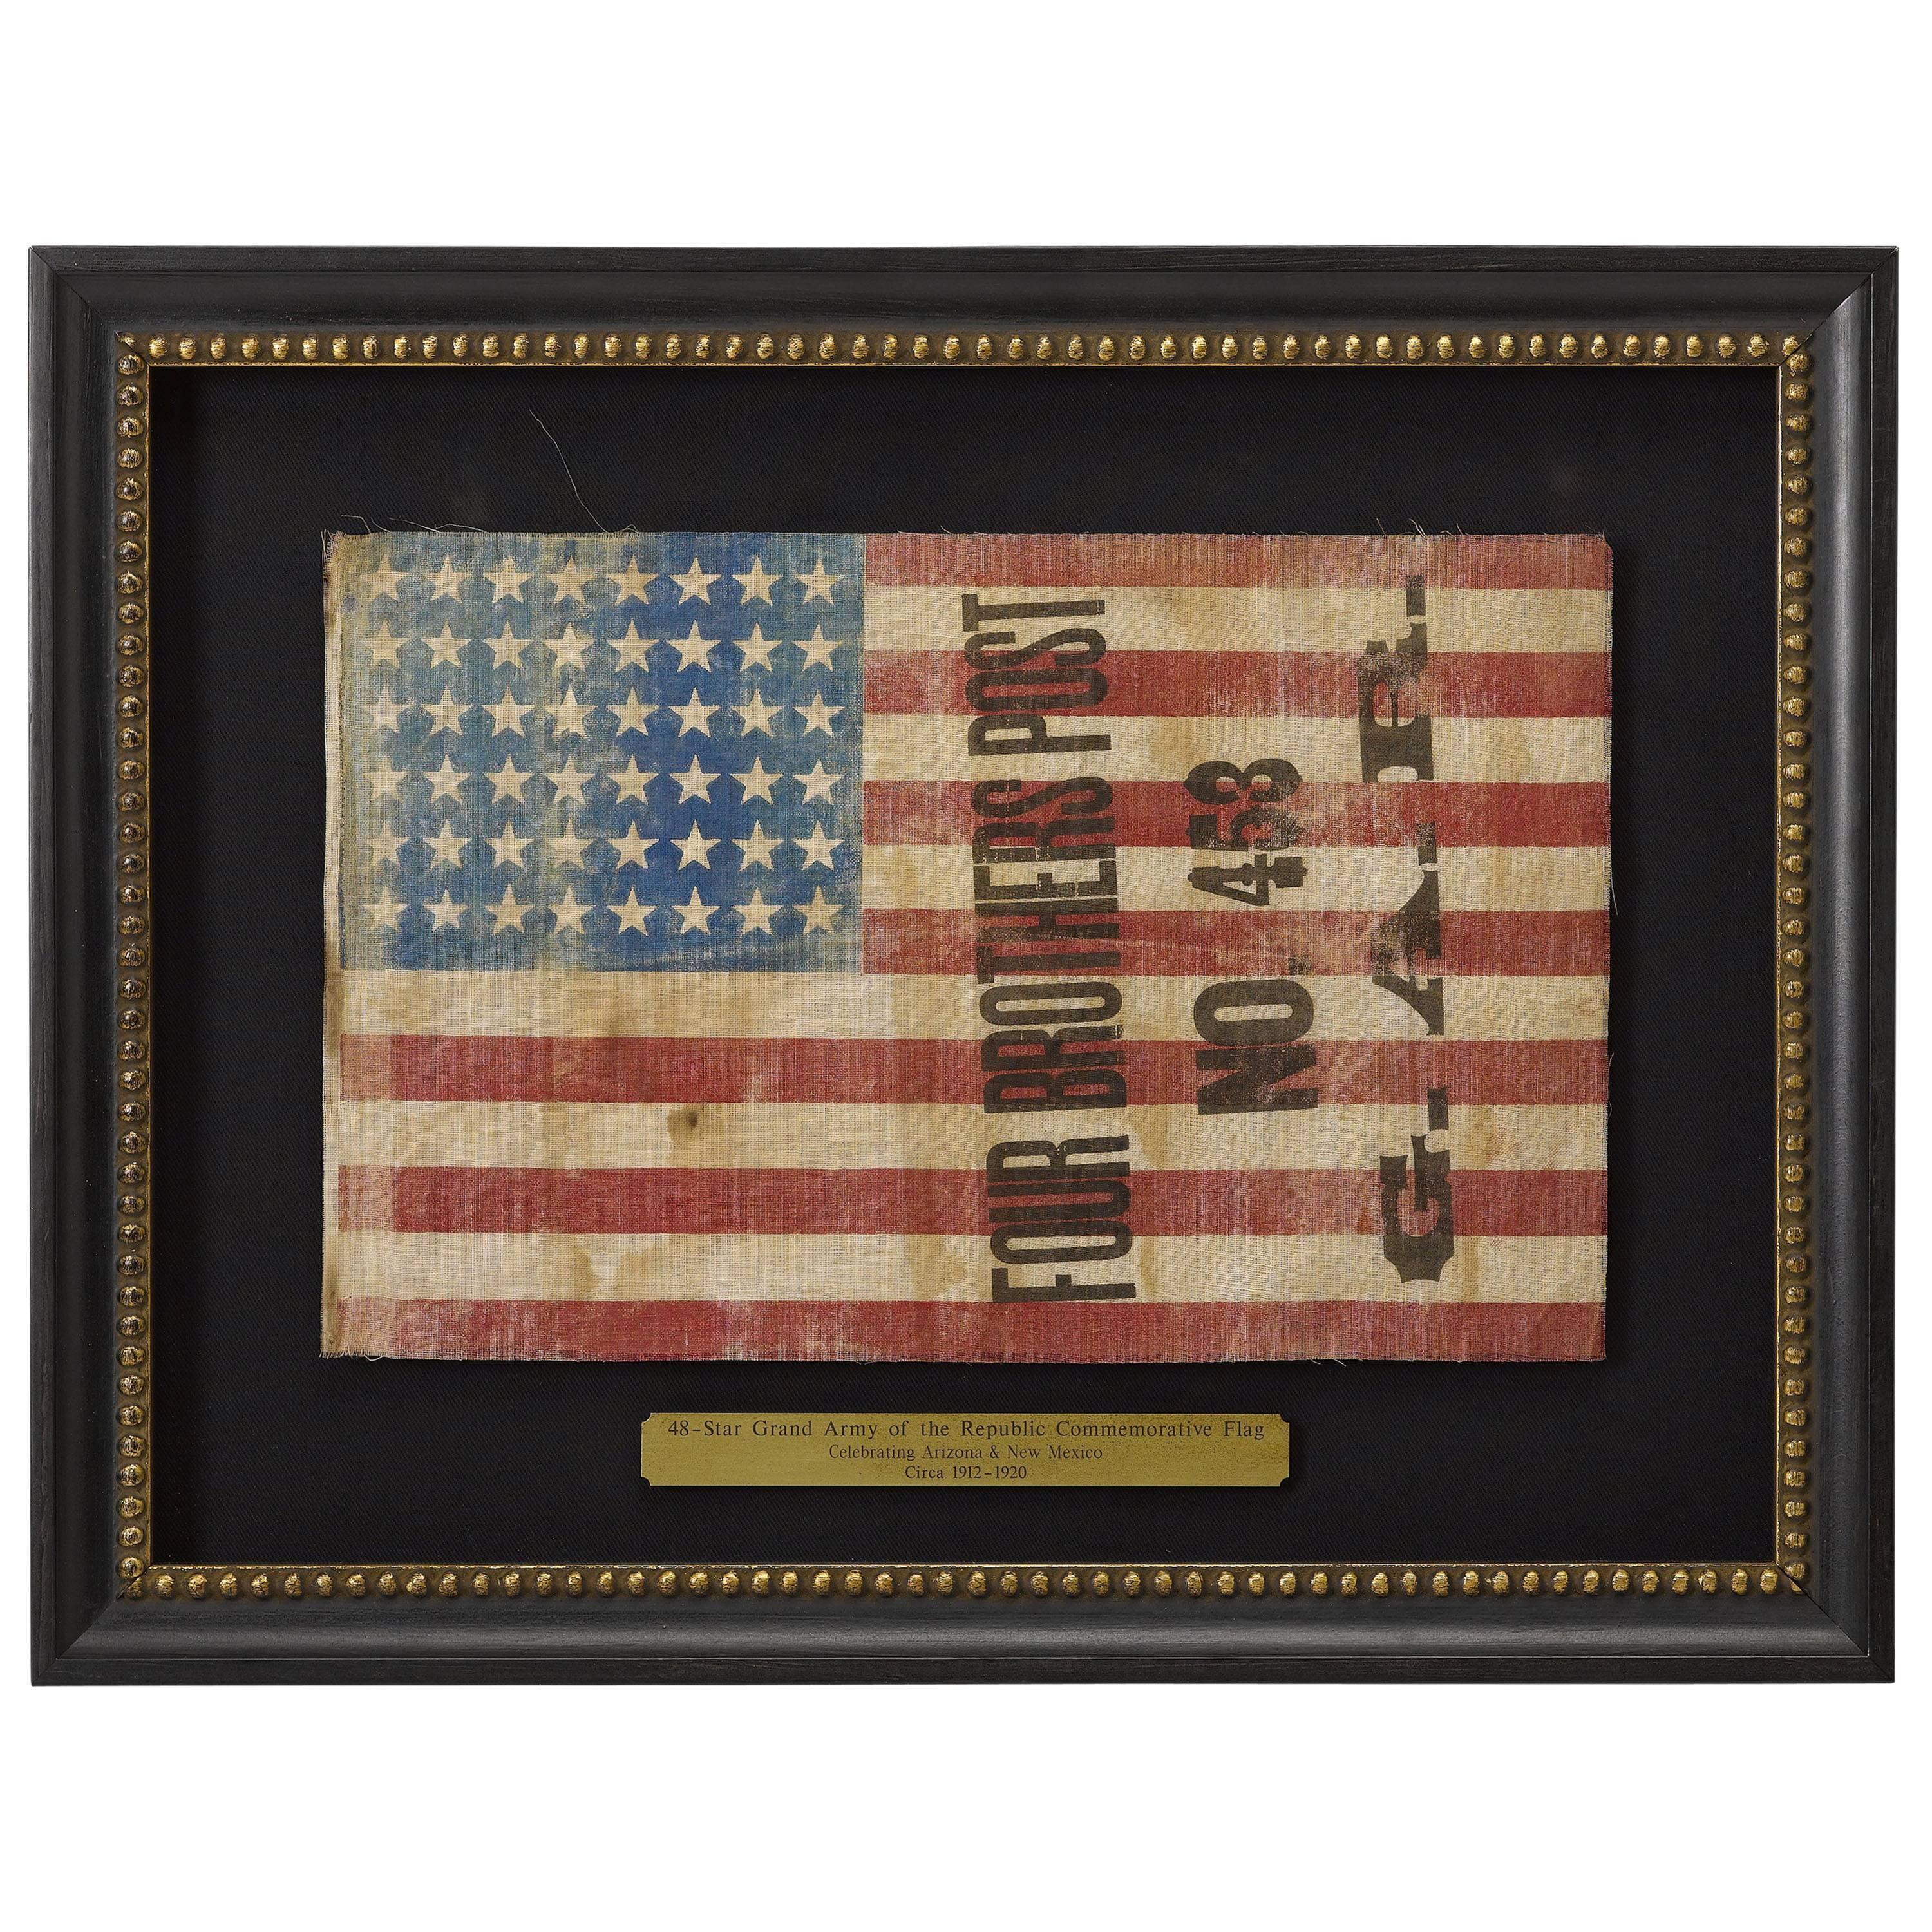 Grand Army of the Republic Commemorative 48-Star Flag, circa Early 20th Century